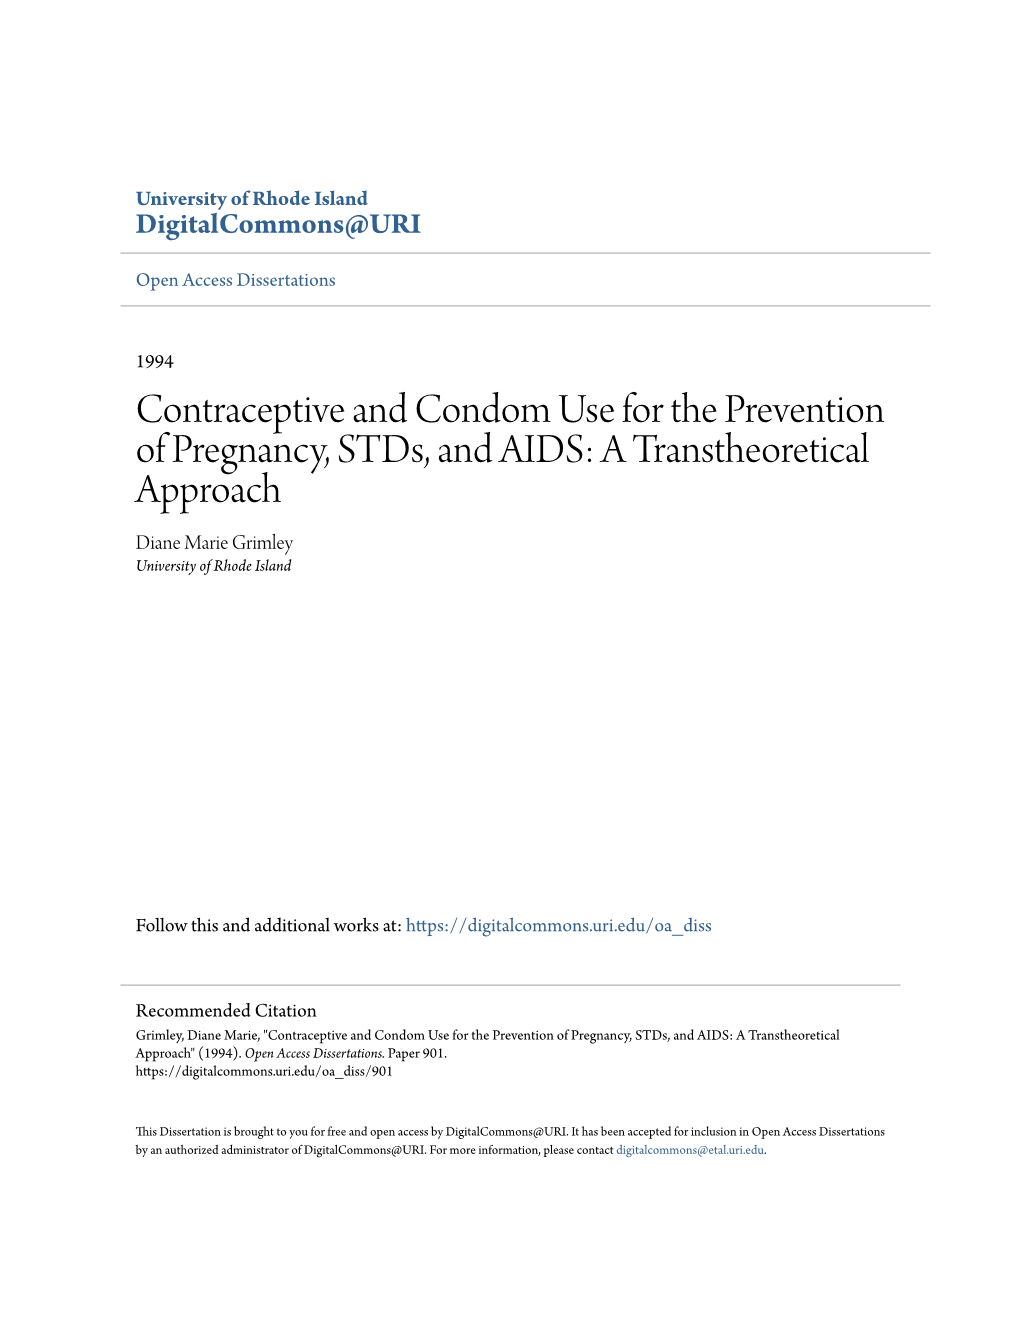 Contraceptive and Condom Use for the Prevention of Pregnancy, Stds, and AIDS: a Transtheoretical Approach Diane Marie Grimley University of Rhode Island